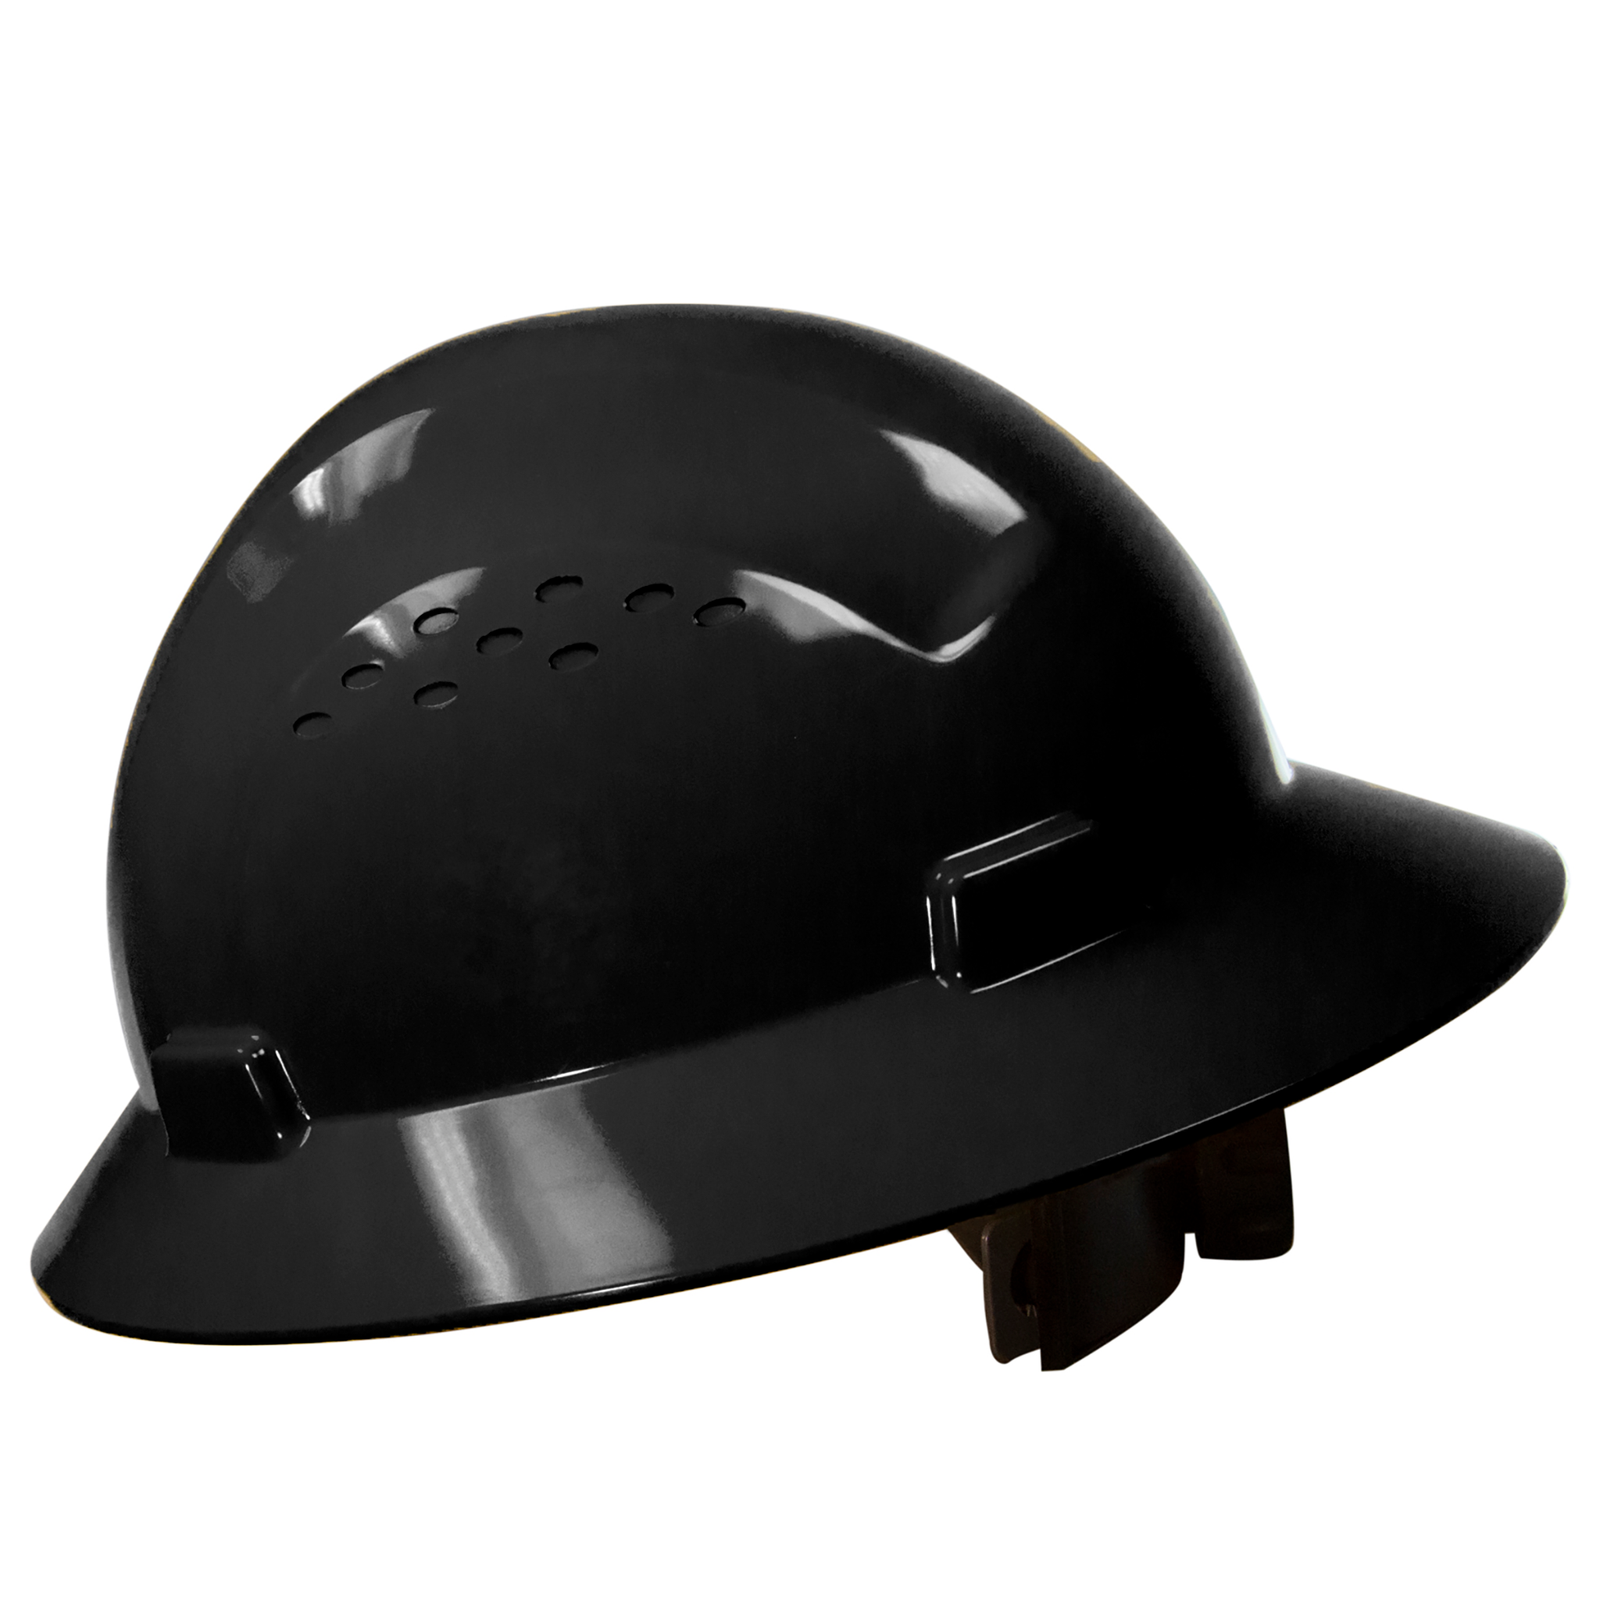 A JORESTECH full brim black safety hard hat with 4 point suspension Type I Class C, E, G